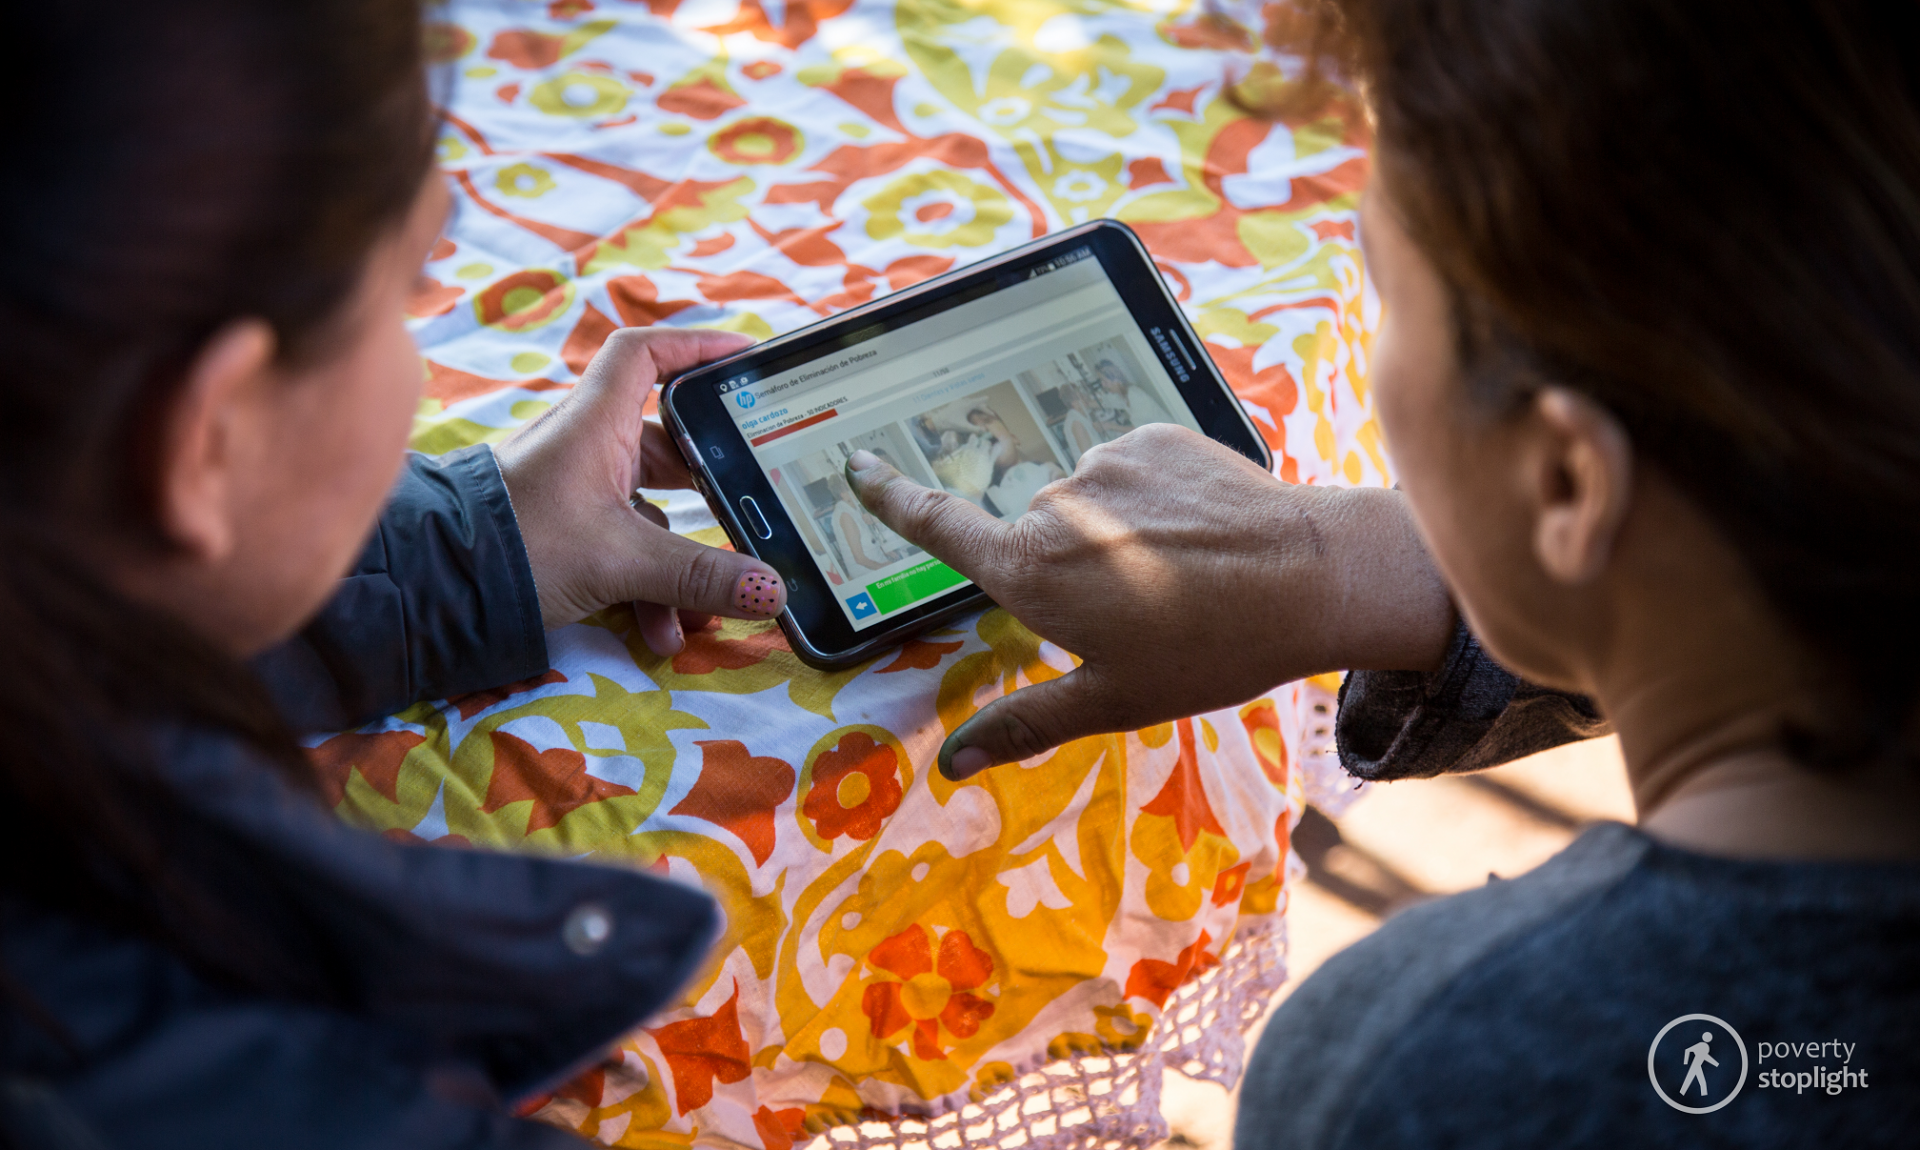 Two people hold and look at a tablet with the poverty spotlight tool.